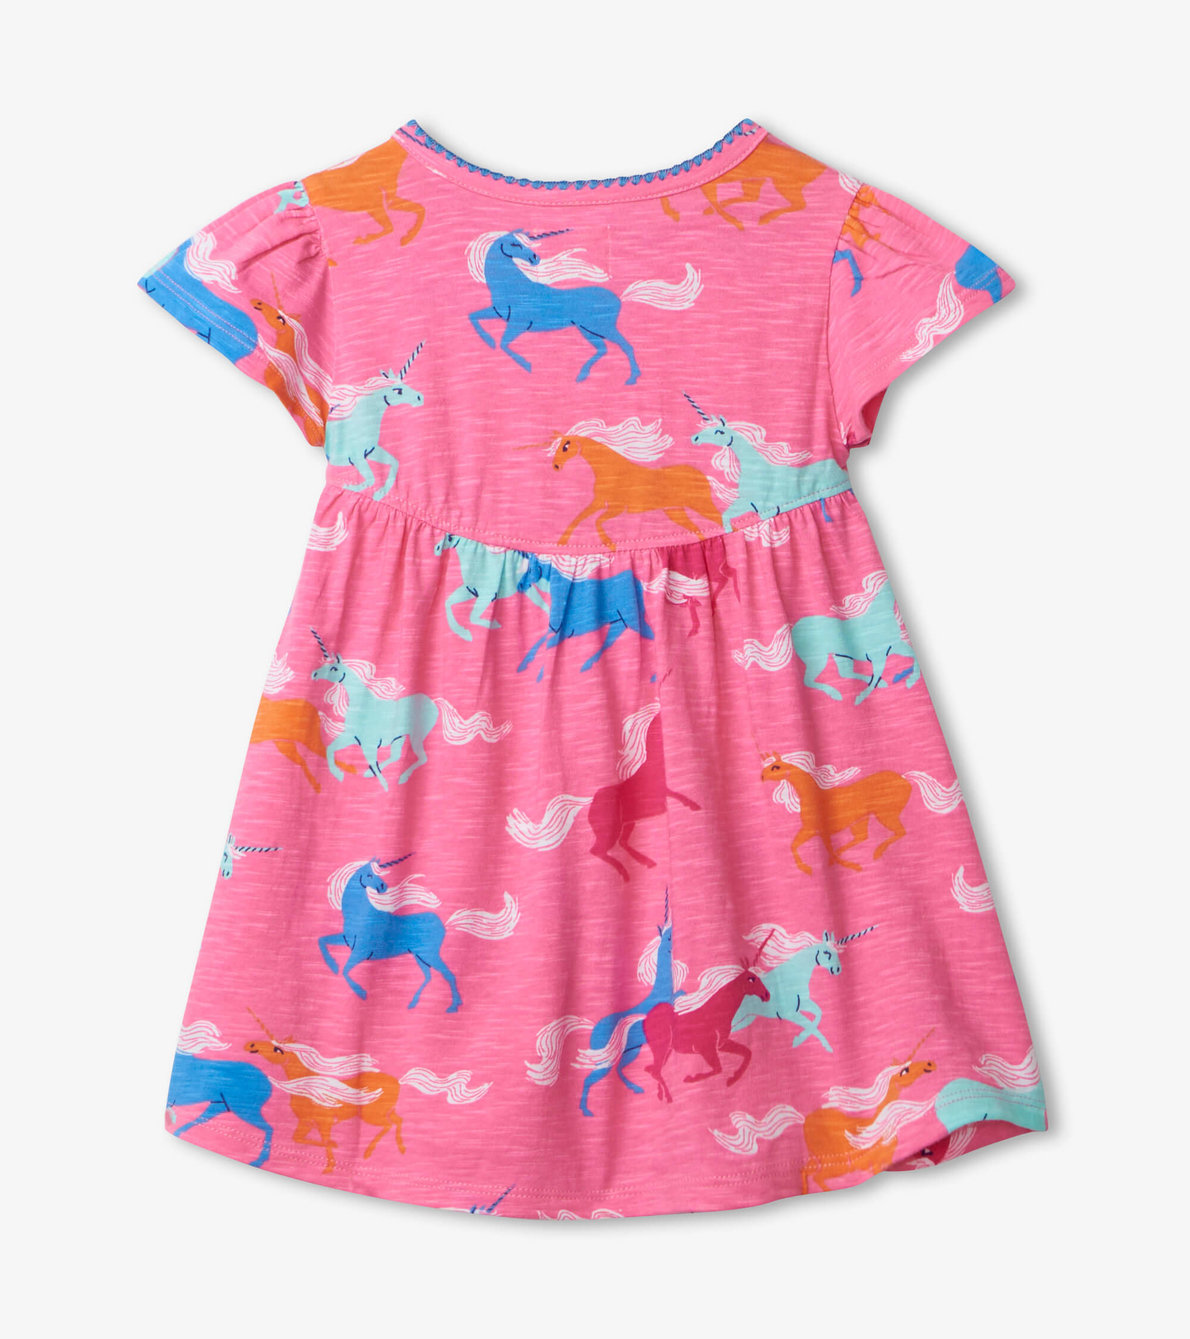 View larger image of Frolicking Unicorns Baby Puff Dress